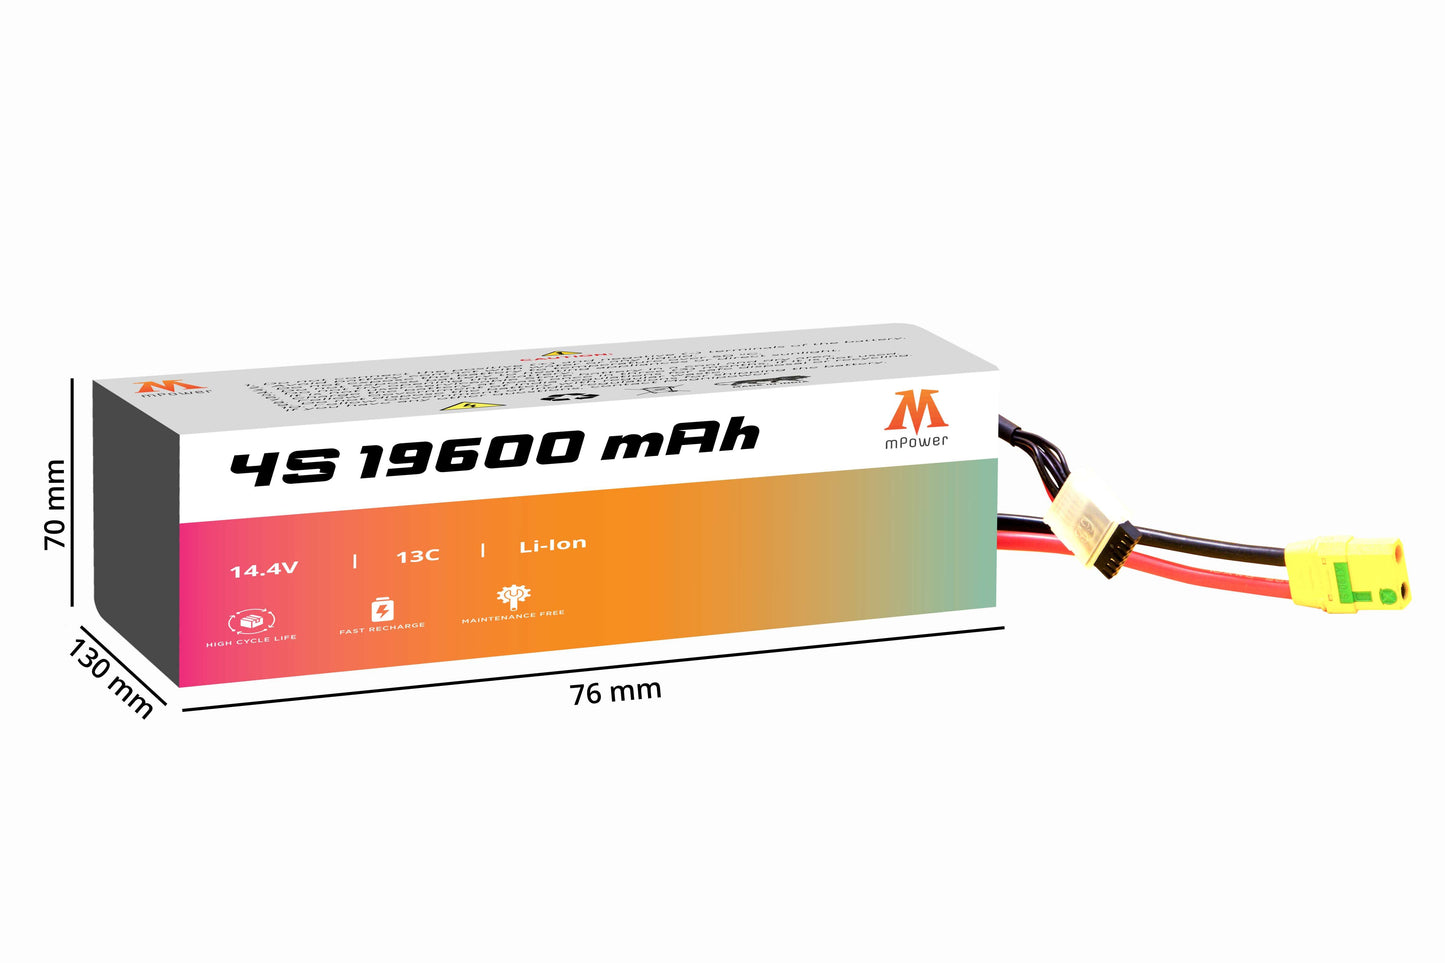 mPower 4S 19600mAh Lithium-Ion Battery for Surveillance Drones